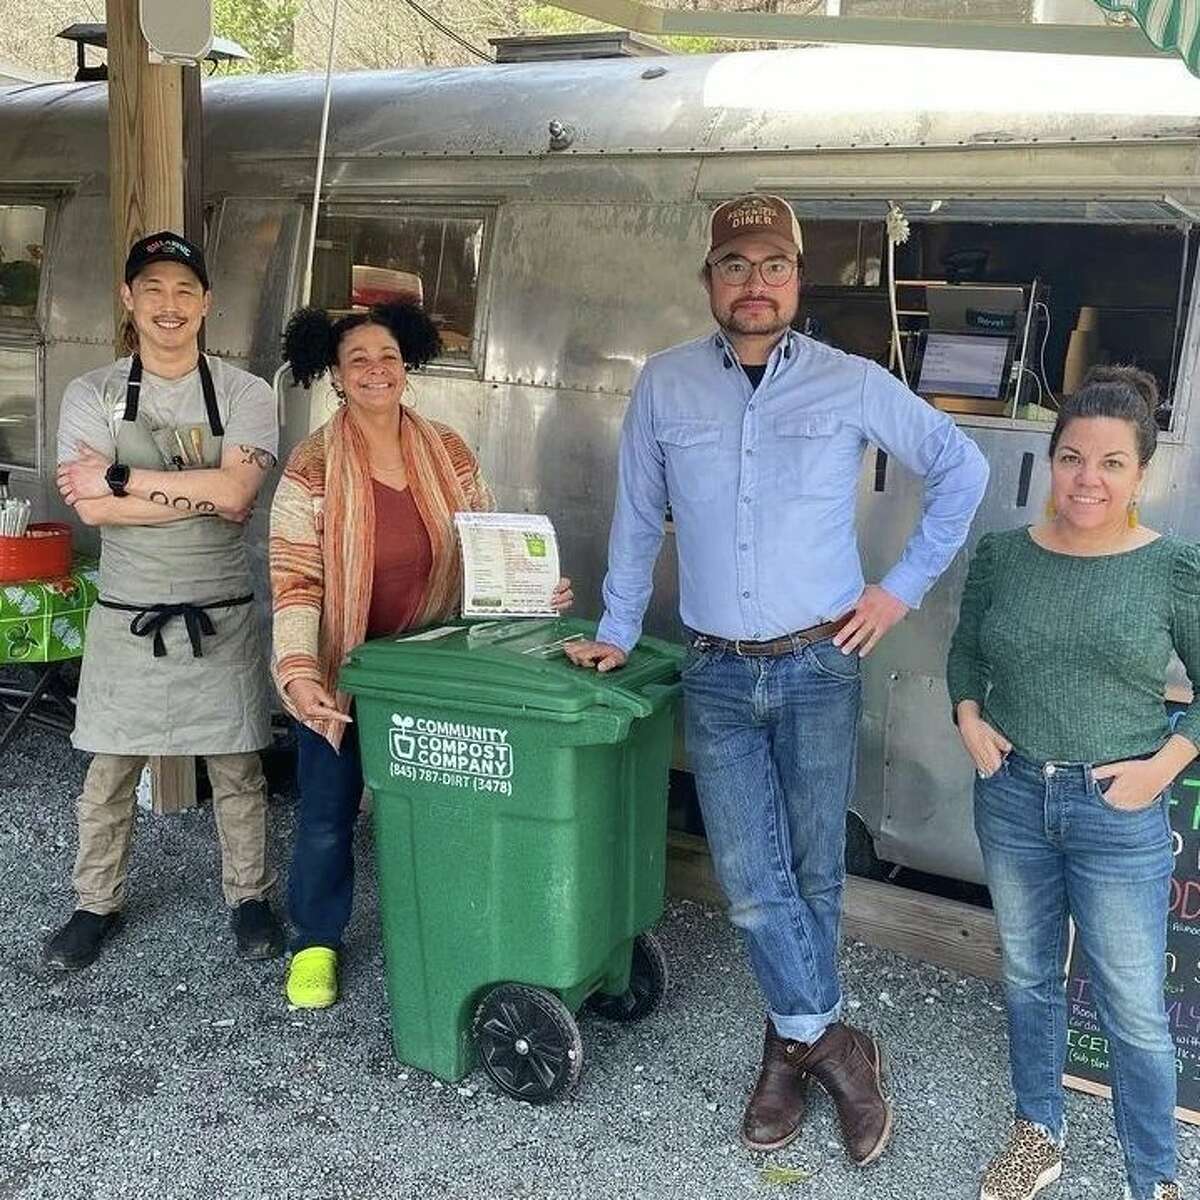 Phoenicia Diner in Ulster County has begun collecting its food scraps for composting, with help from Kerhonkson-based Community Compost Company.